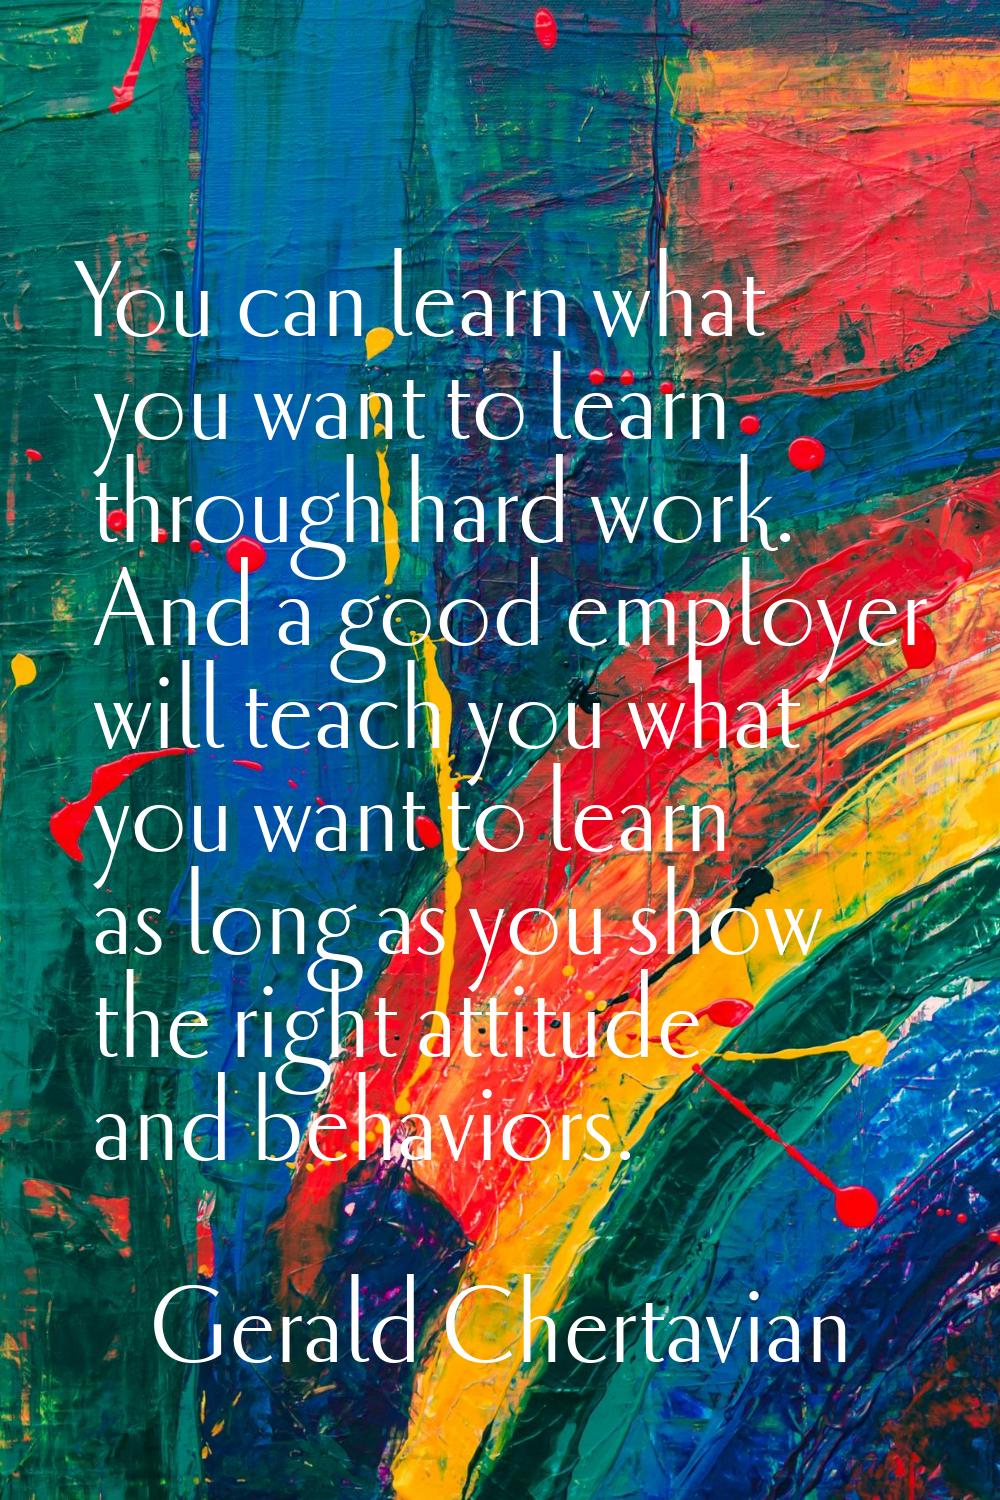 You can learn what you want to learn through hard work. And a good employer will teach you what you